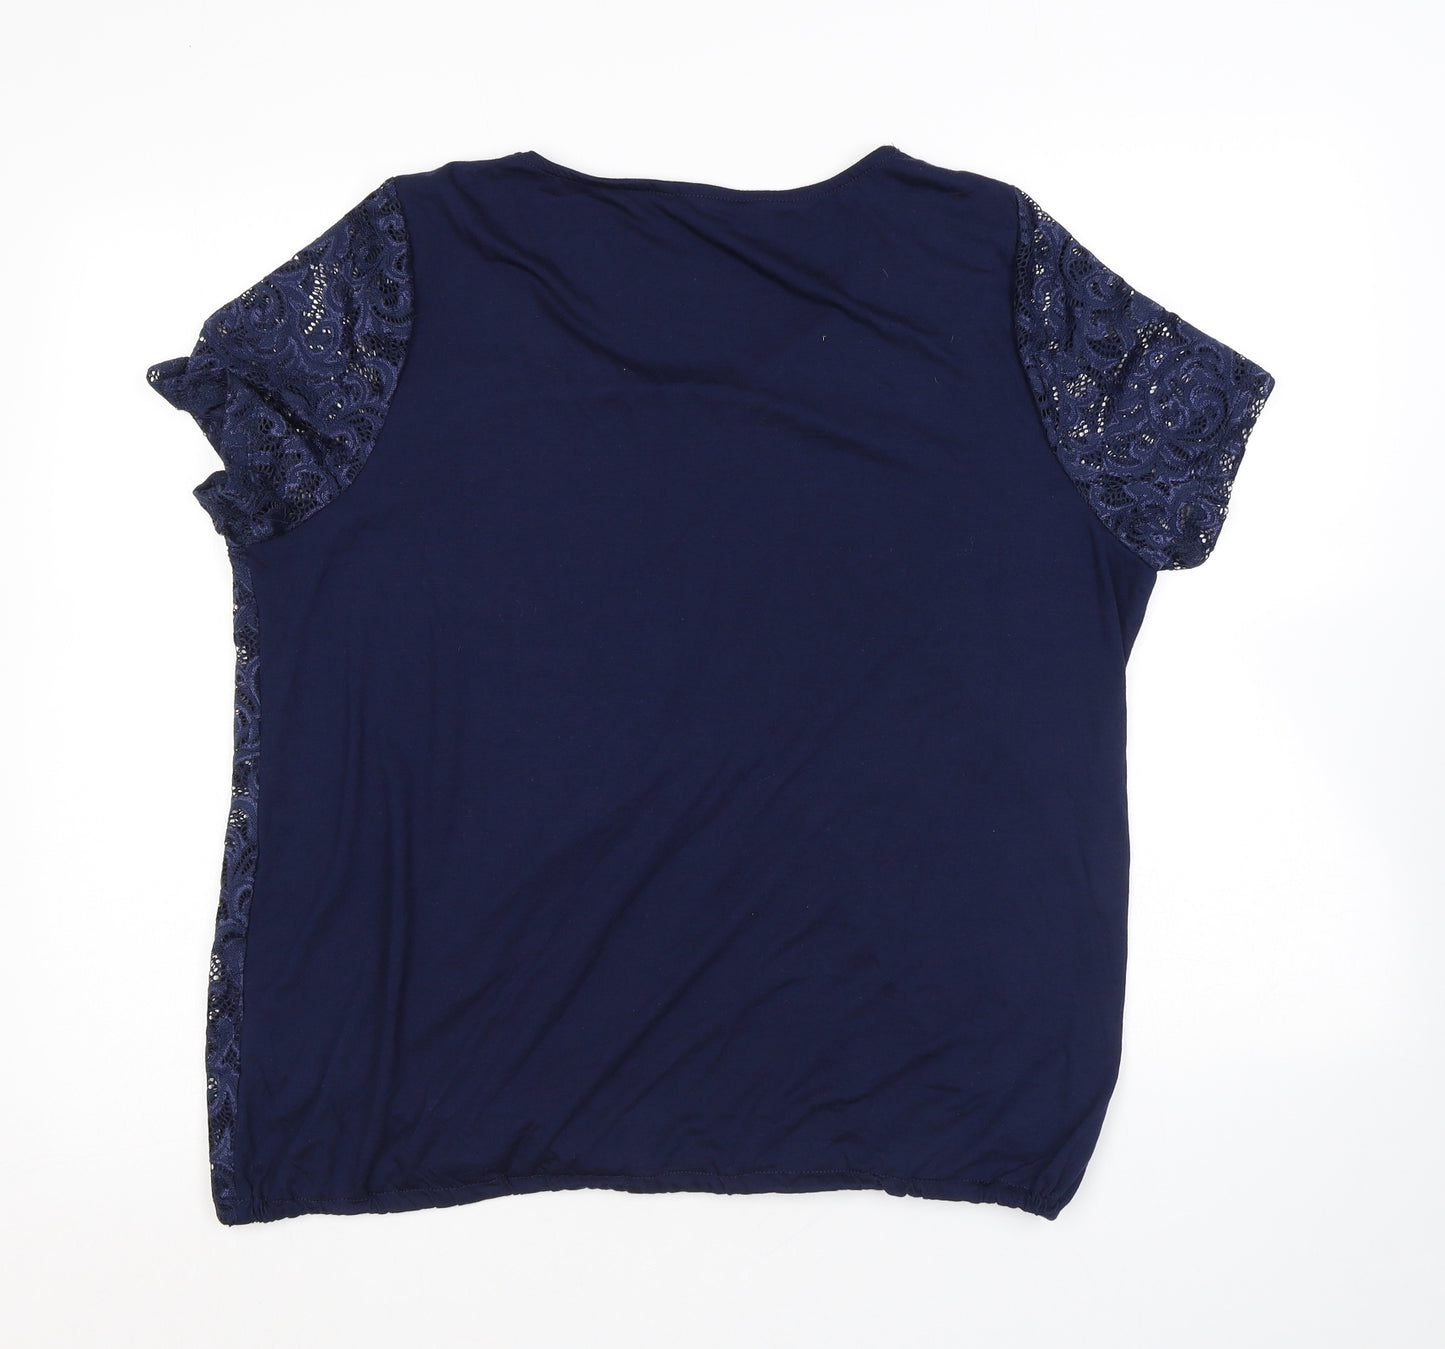 Bonmarché Womens Blue Geometric Polyester Basic T-Shirt Size 18 Round Neck - Lace Overlay